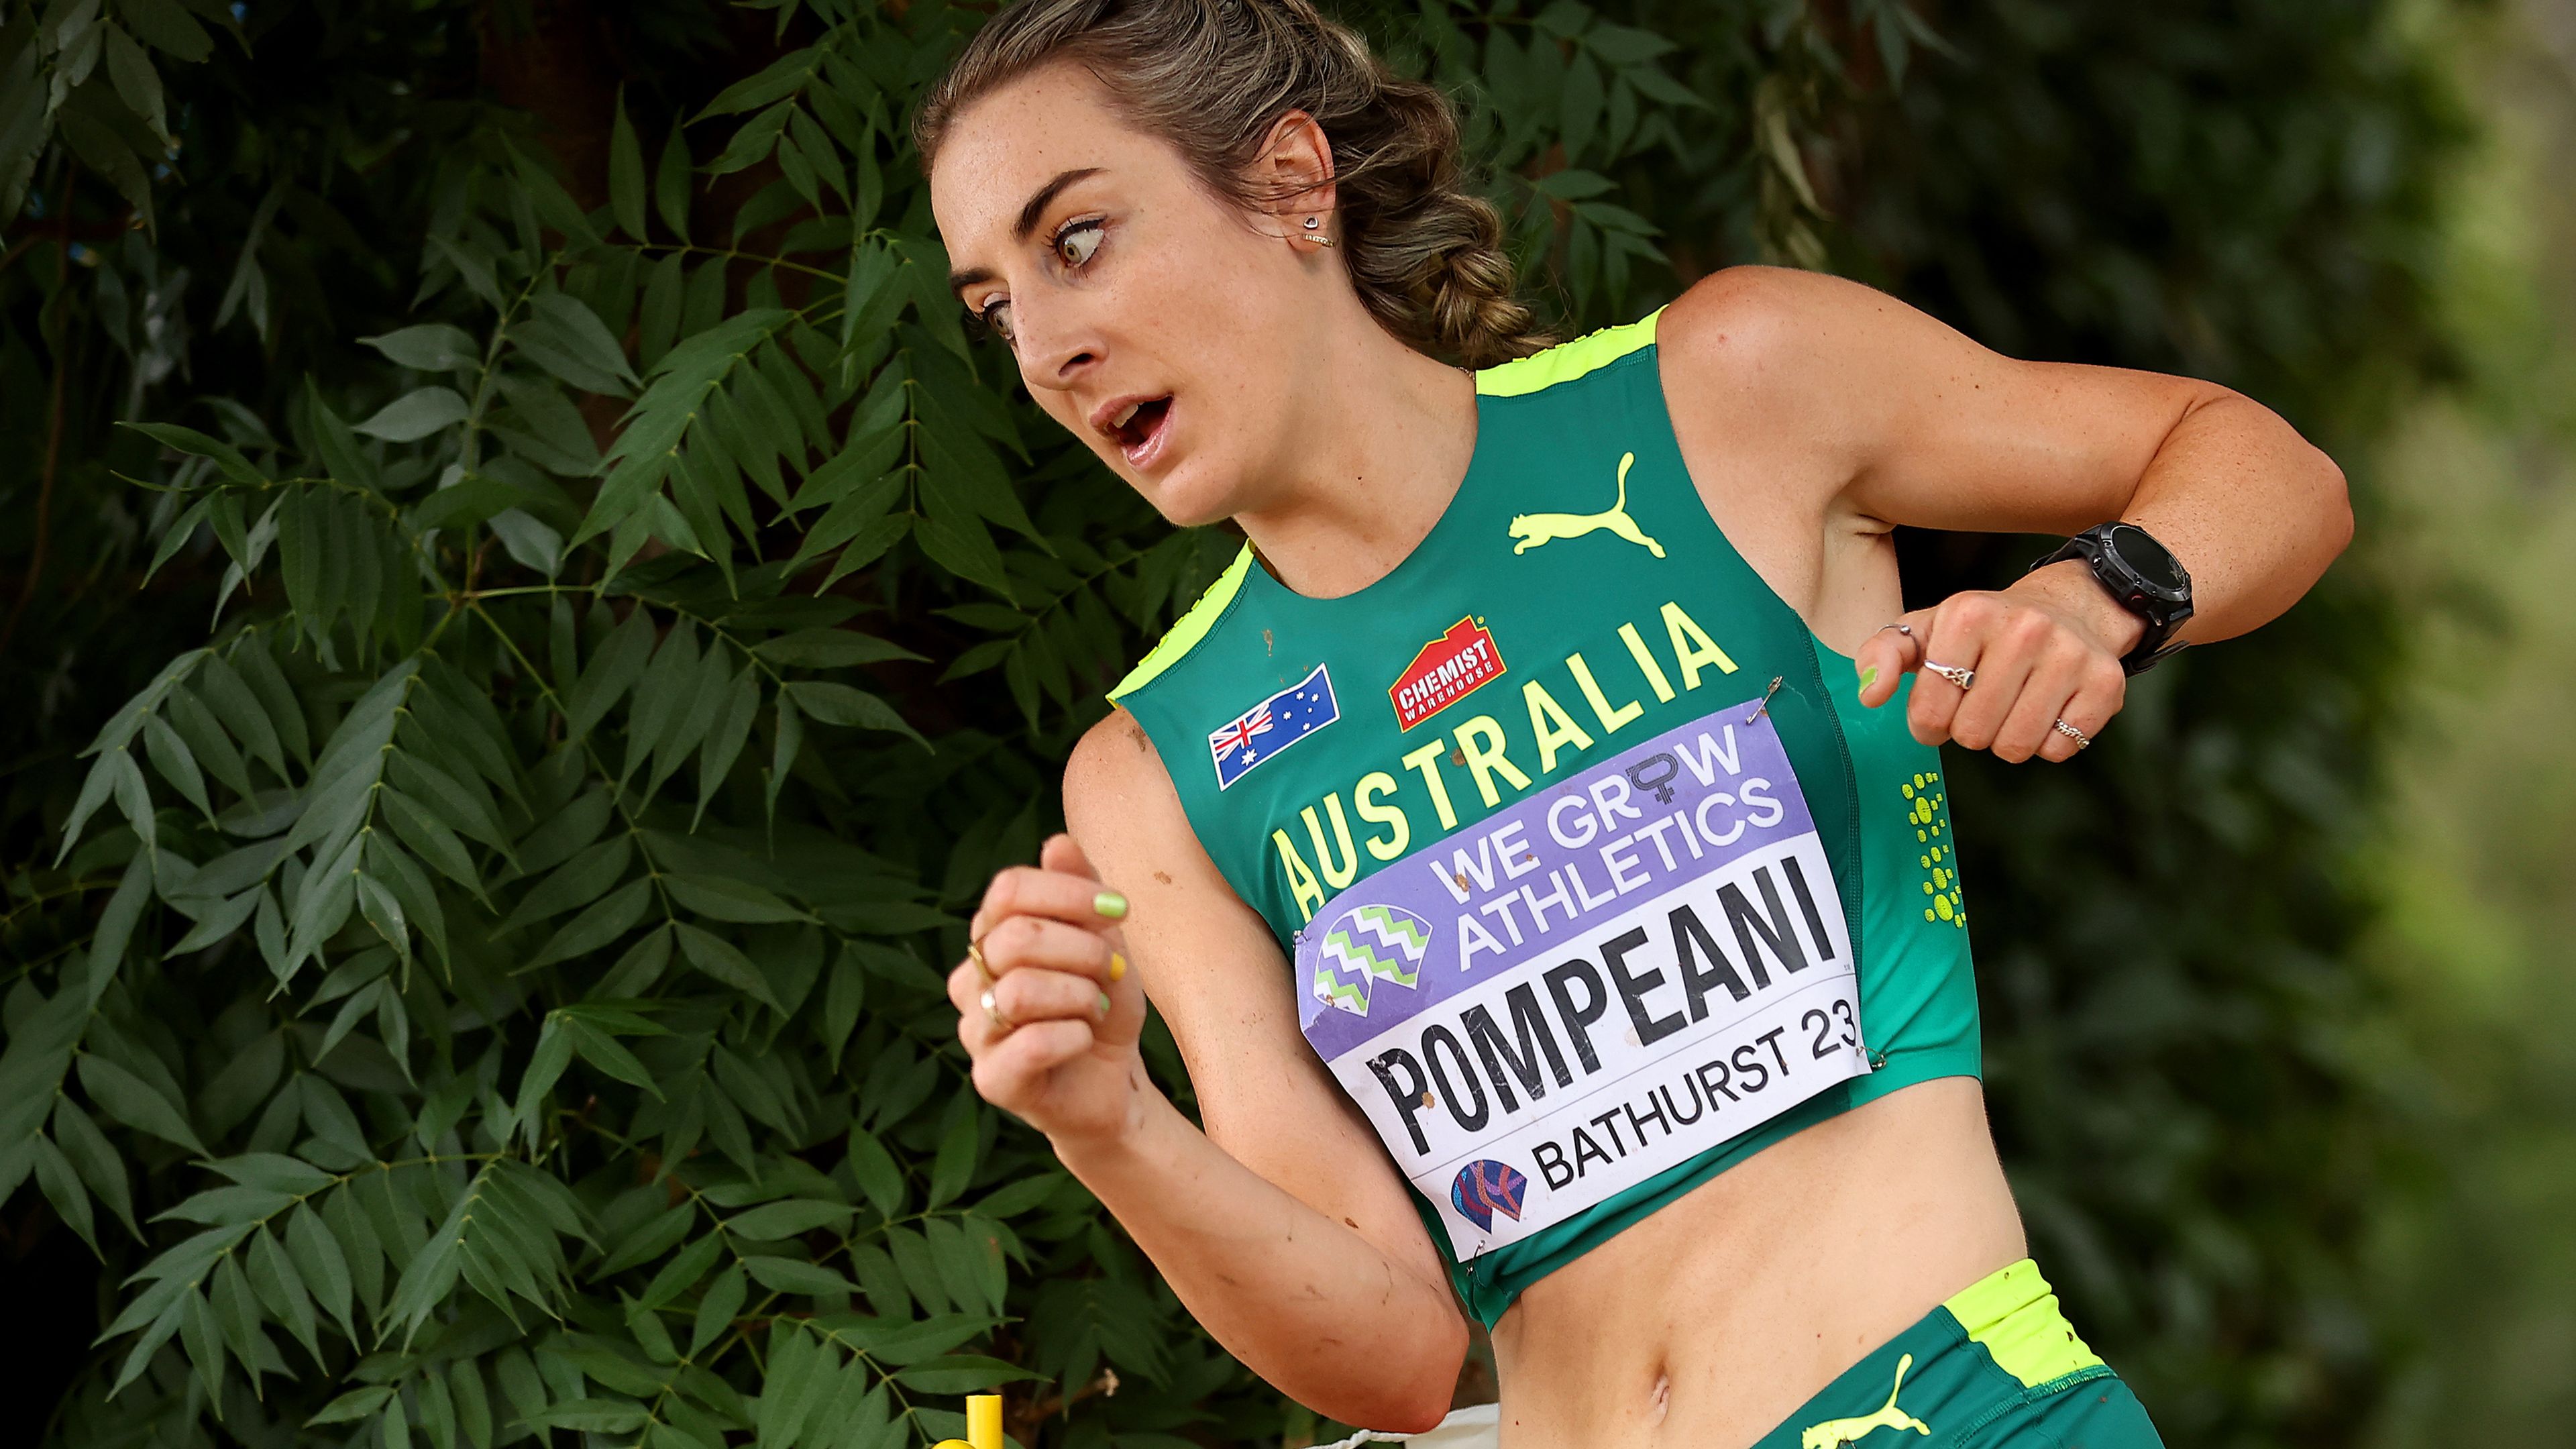 EXCLUSIVE: Aussie distance runner's scary account of 'confronting' ordeal